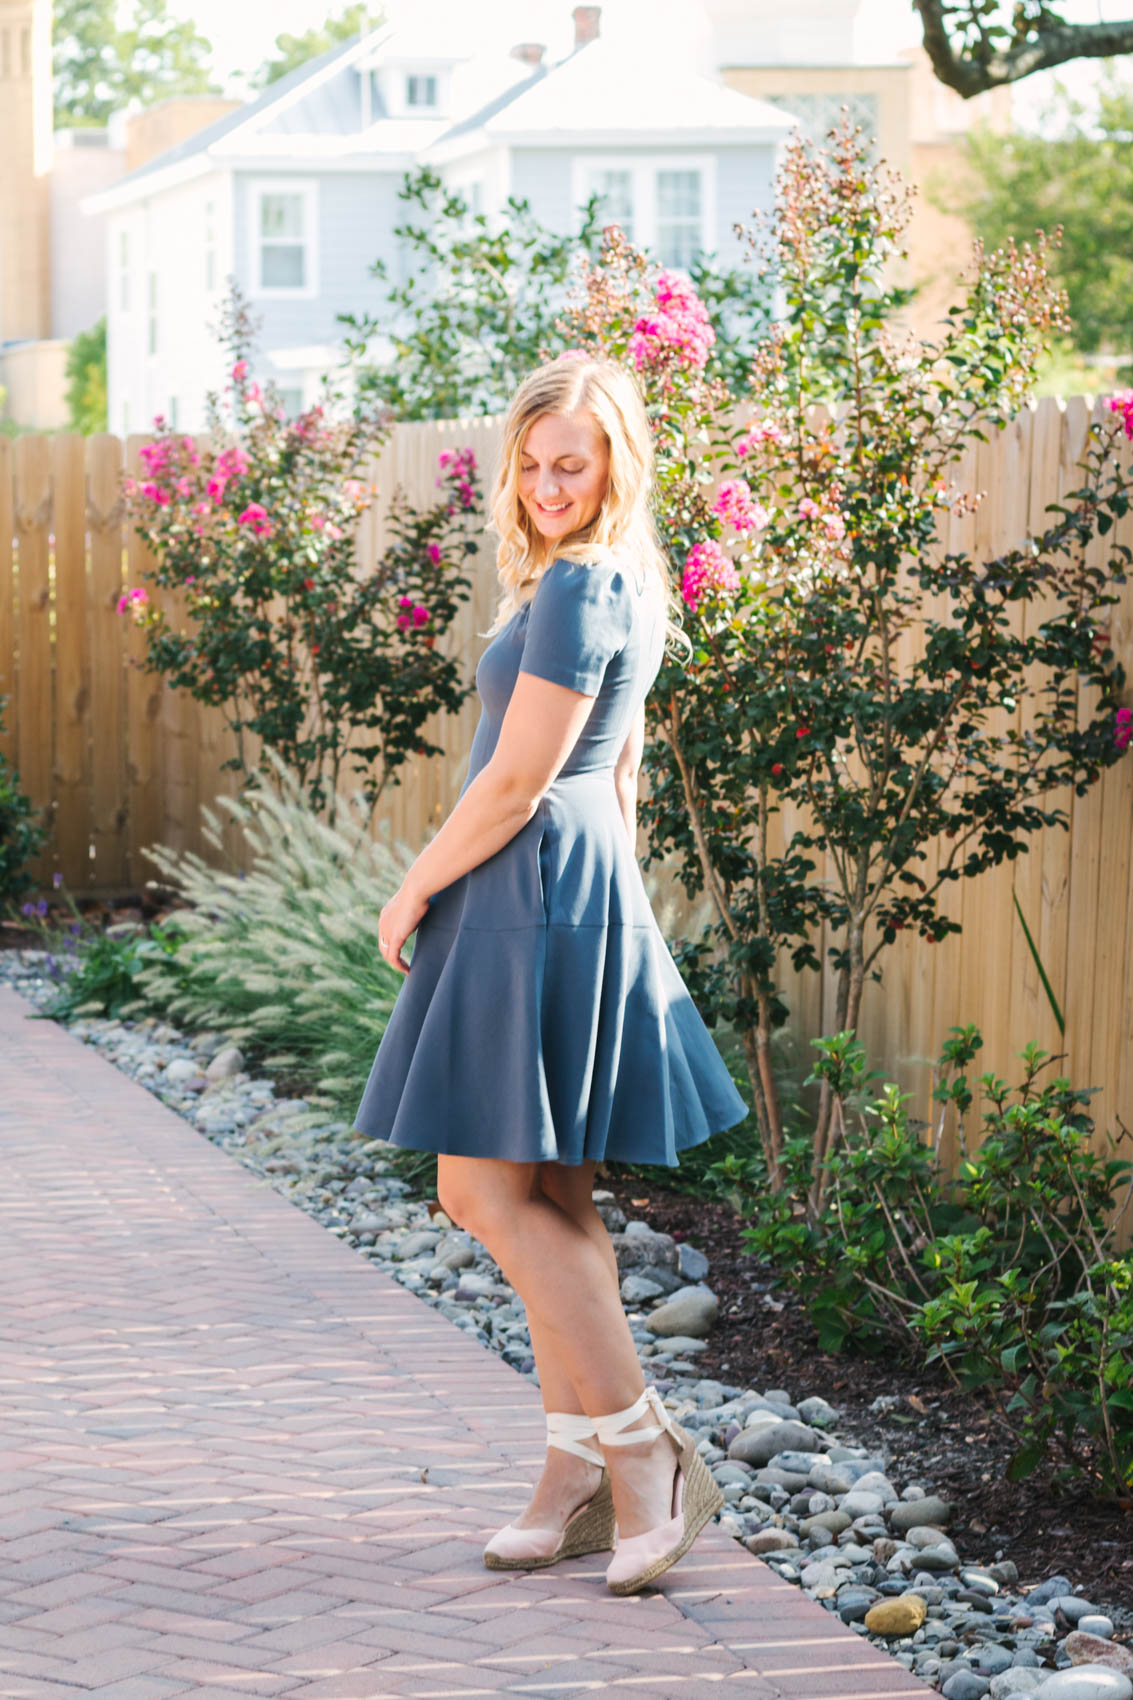 The Fit and Flare Dress with Pockets I Can't Stop Wearing - Allyn Lewis